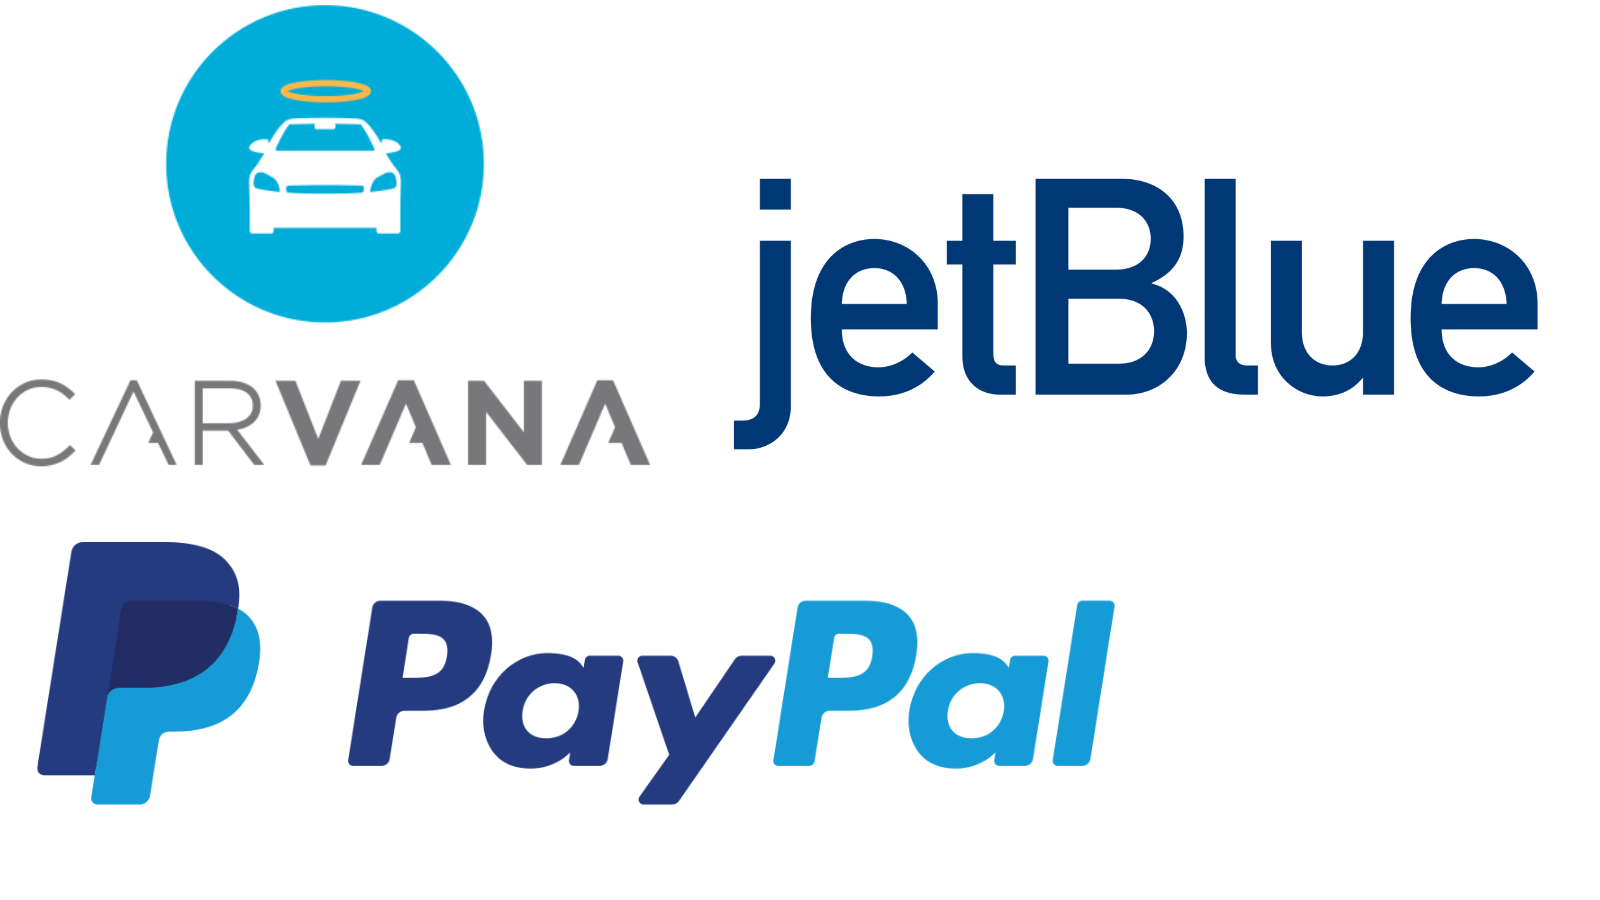 The logos and wordmarks for Carvana, PayPal, and JetBlue